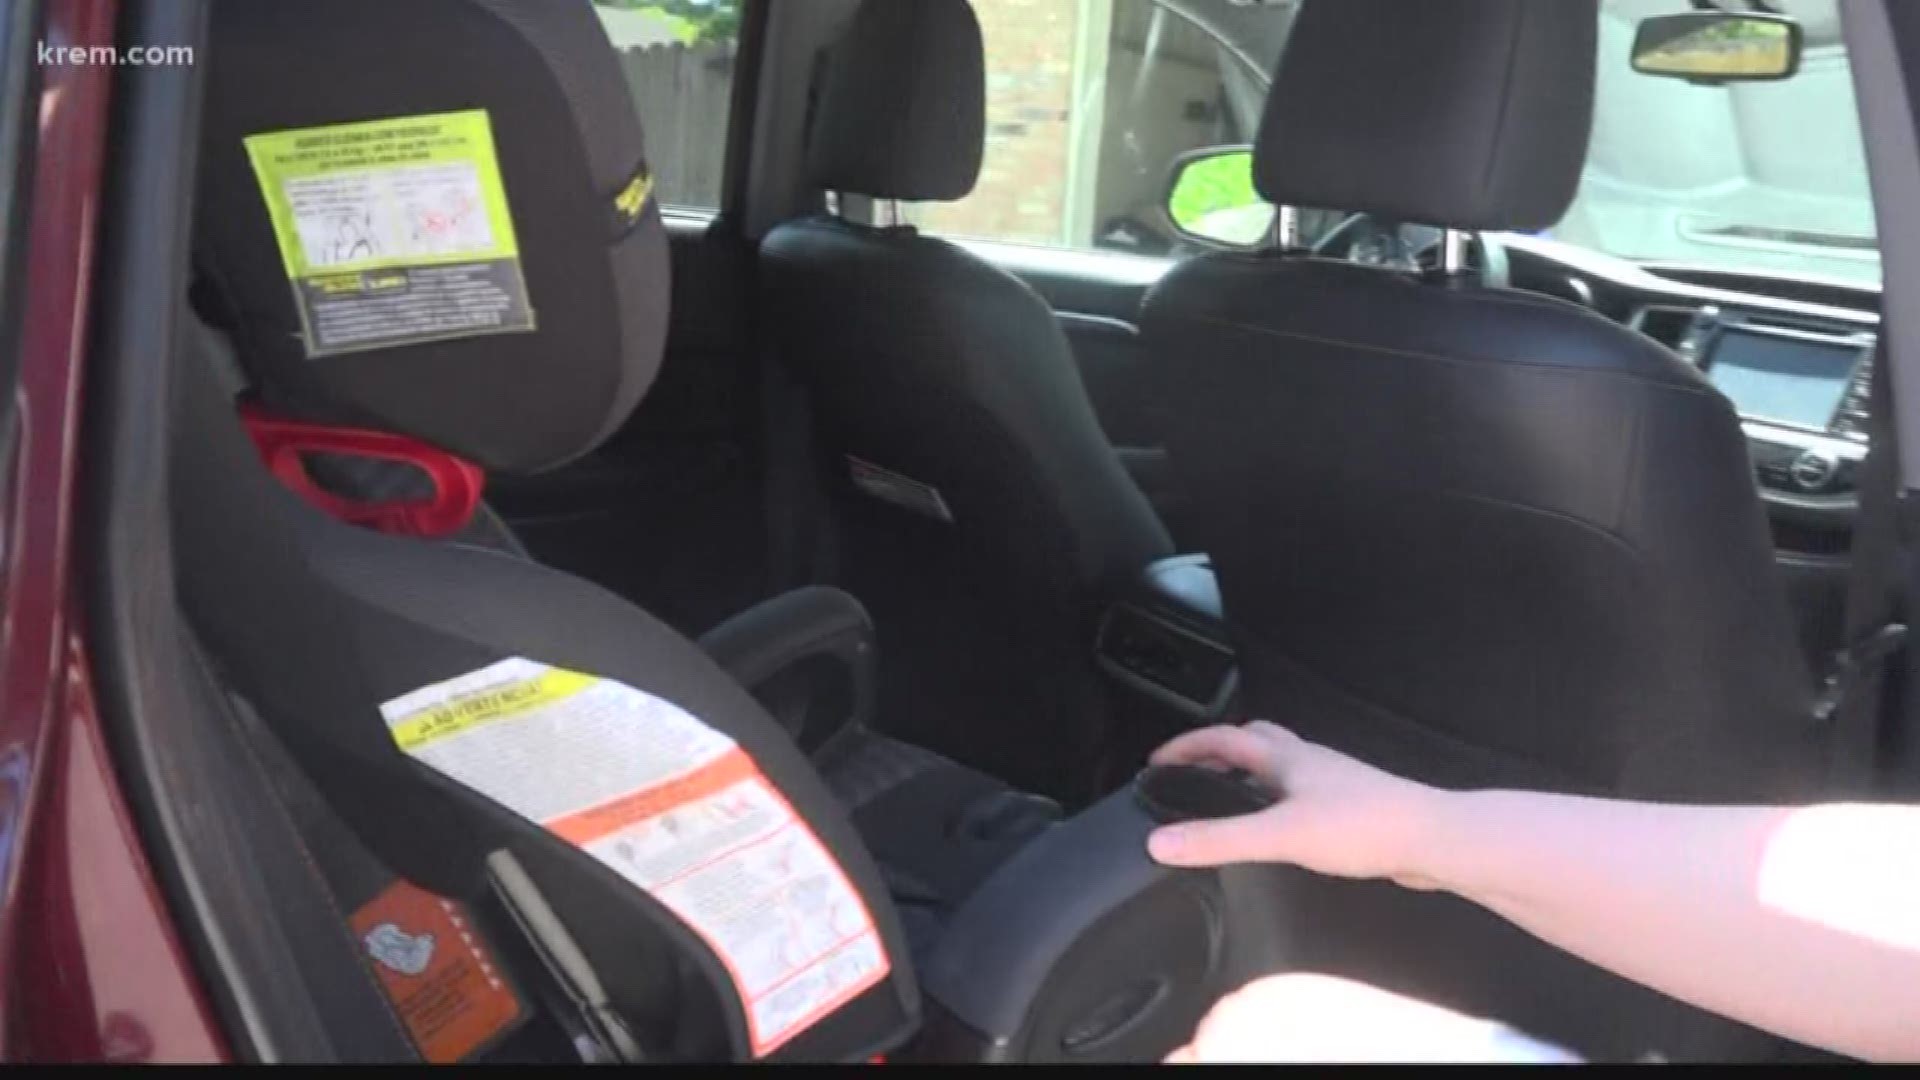 Questions remain over Washington's new car seat law